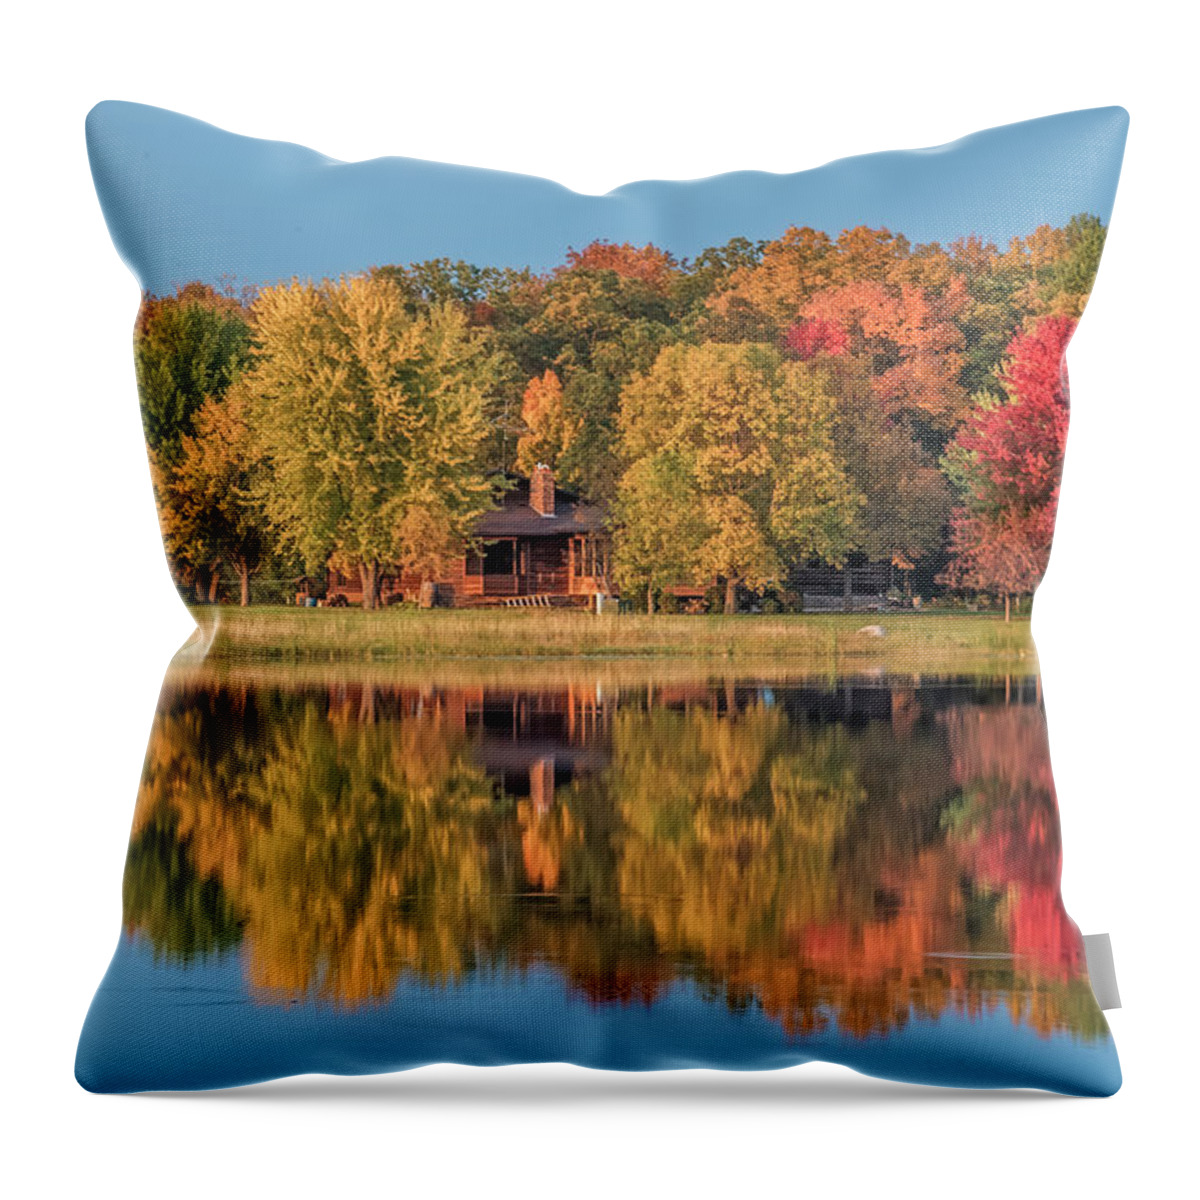 Picturesque Throw Pillow featuring the photograph Fall Colors in Cabin Country by Paul Freidlund